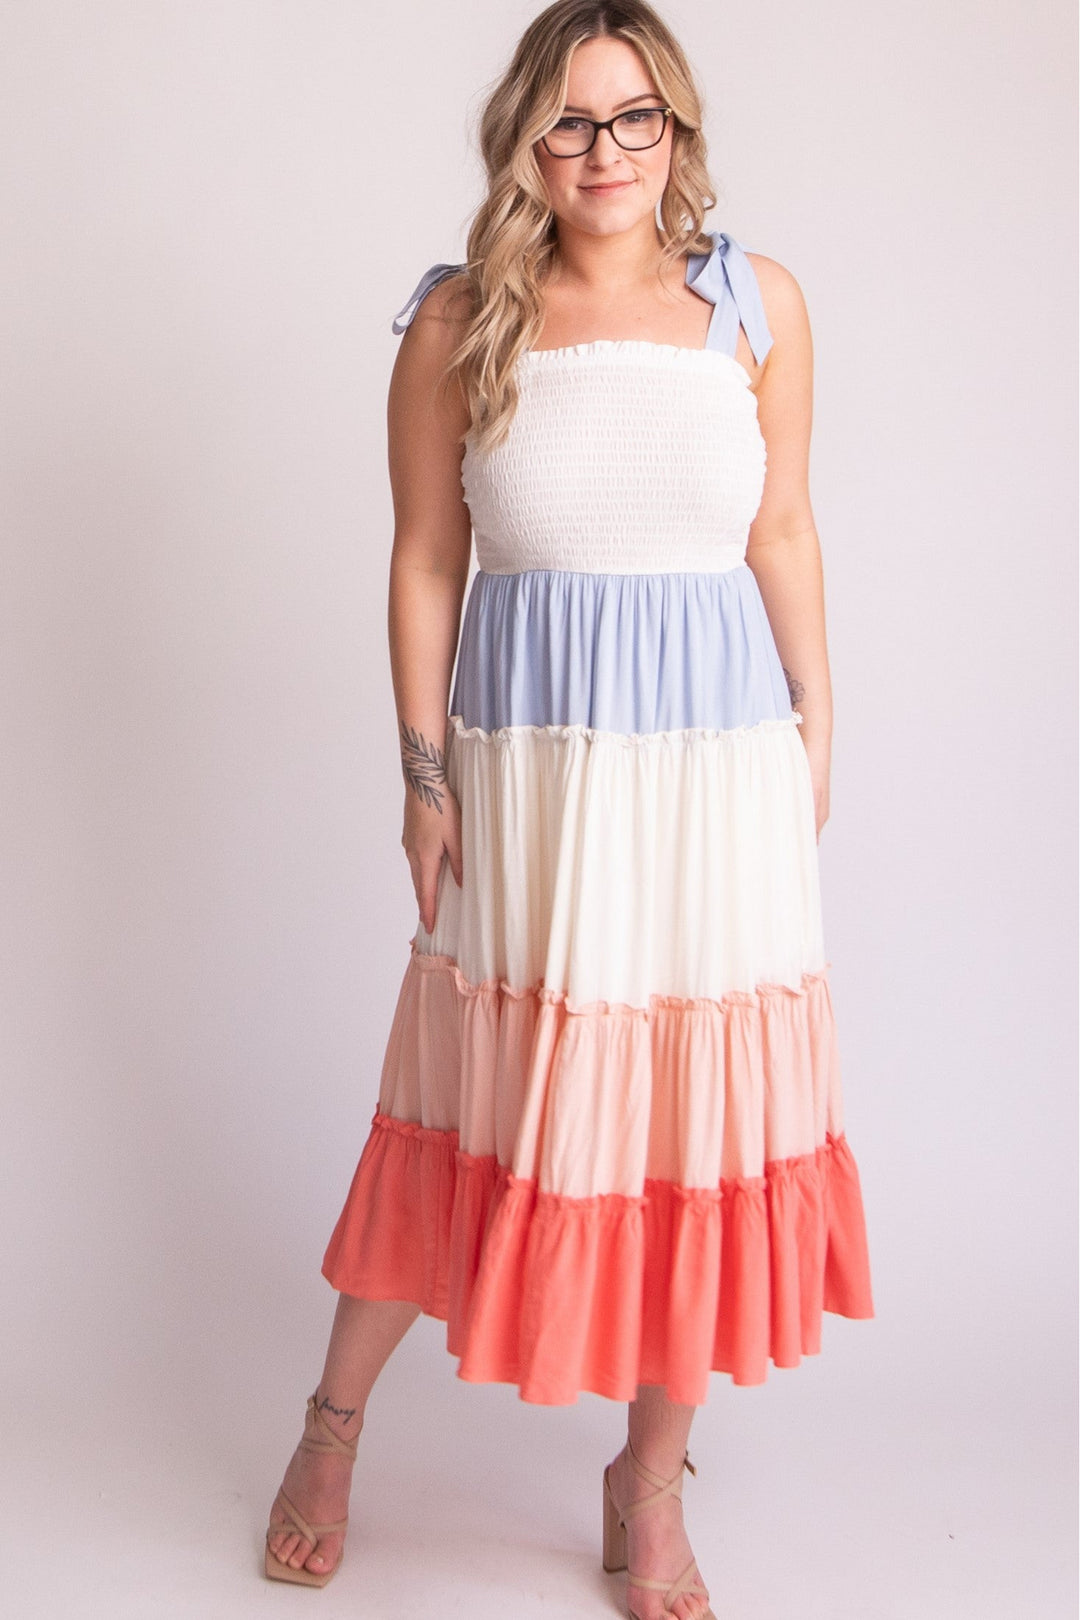 You Are My Sunshine Tiered Maxi Dress - Expressive Collective CO.